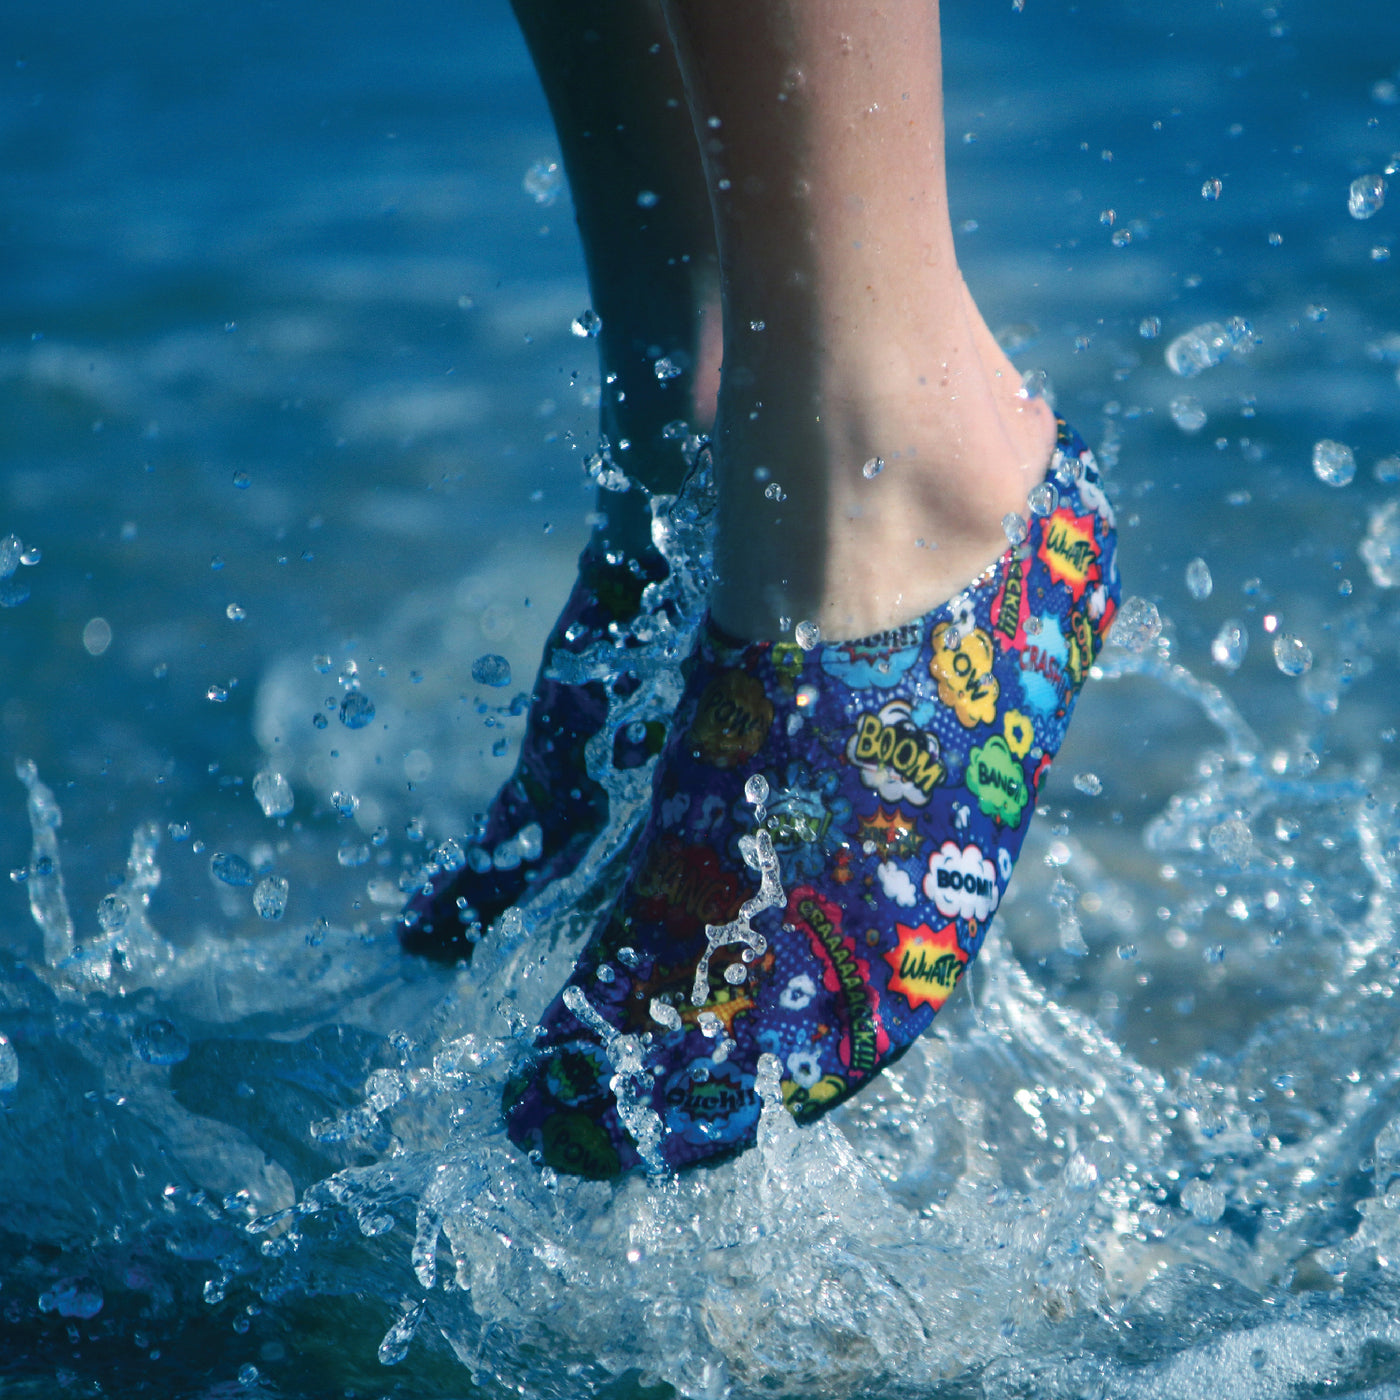 Lifestyle image of kid wearing superhero themed water shoes, jumping in the sea.